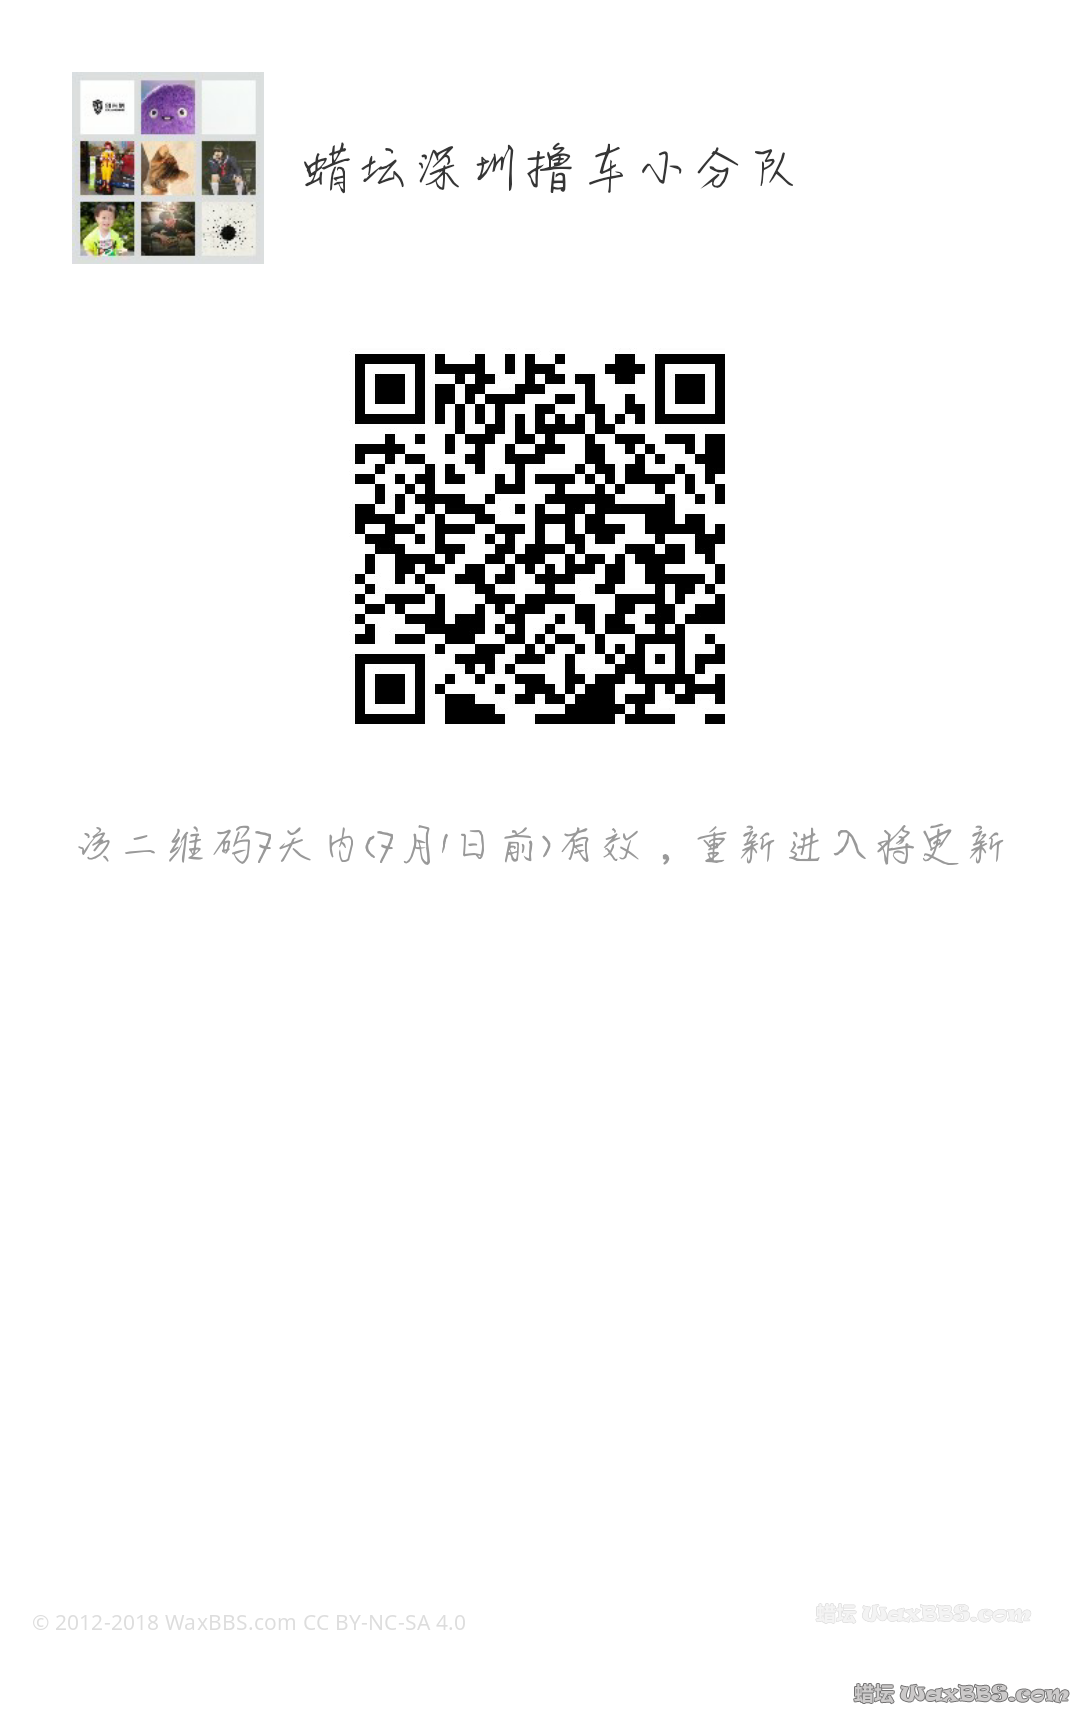 mmqrcode1498253194014.png